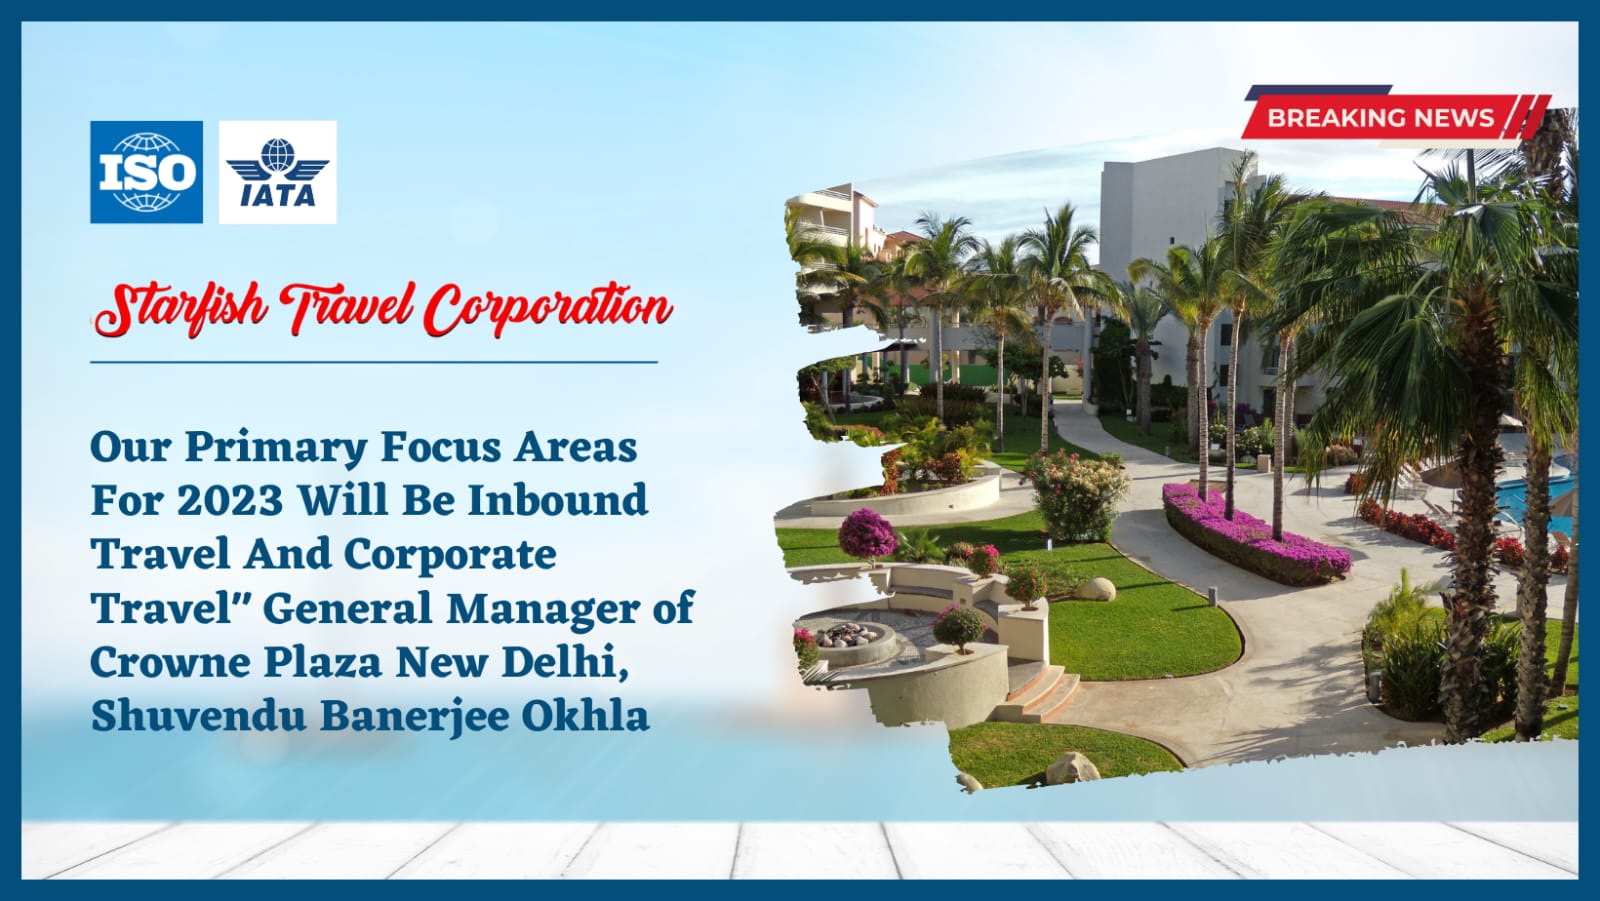 You are currently viewing Our Primary Focus Areas For 2023 Will Be Inbound Travel And Corporate Travel” General Manager of Crowne Plaza New Delhi, Shuvendu Banerjee Okhla